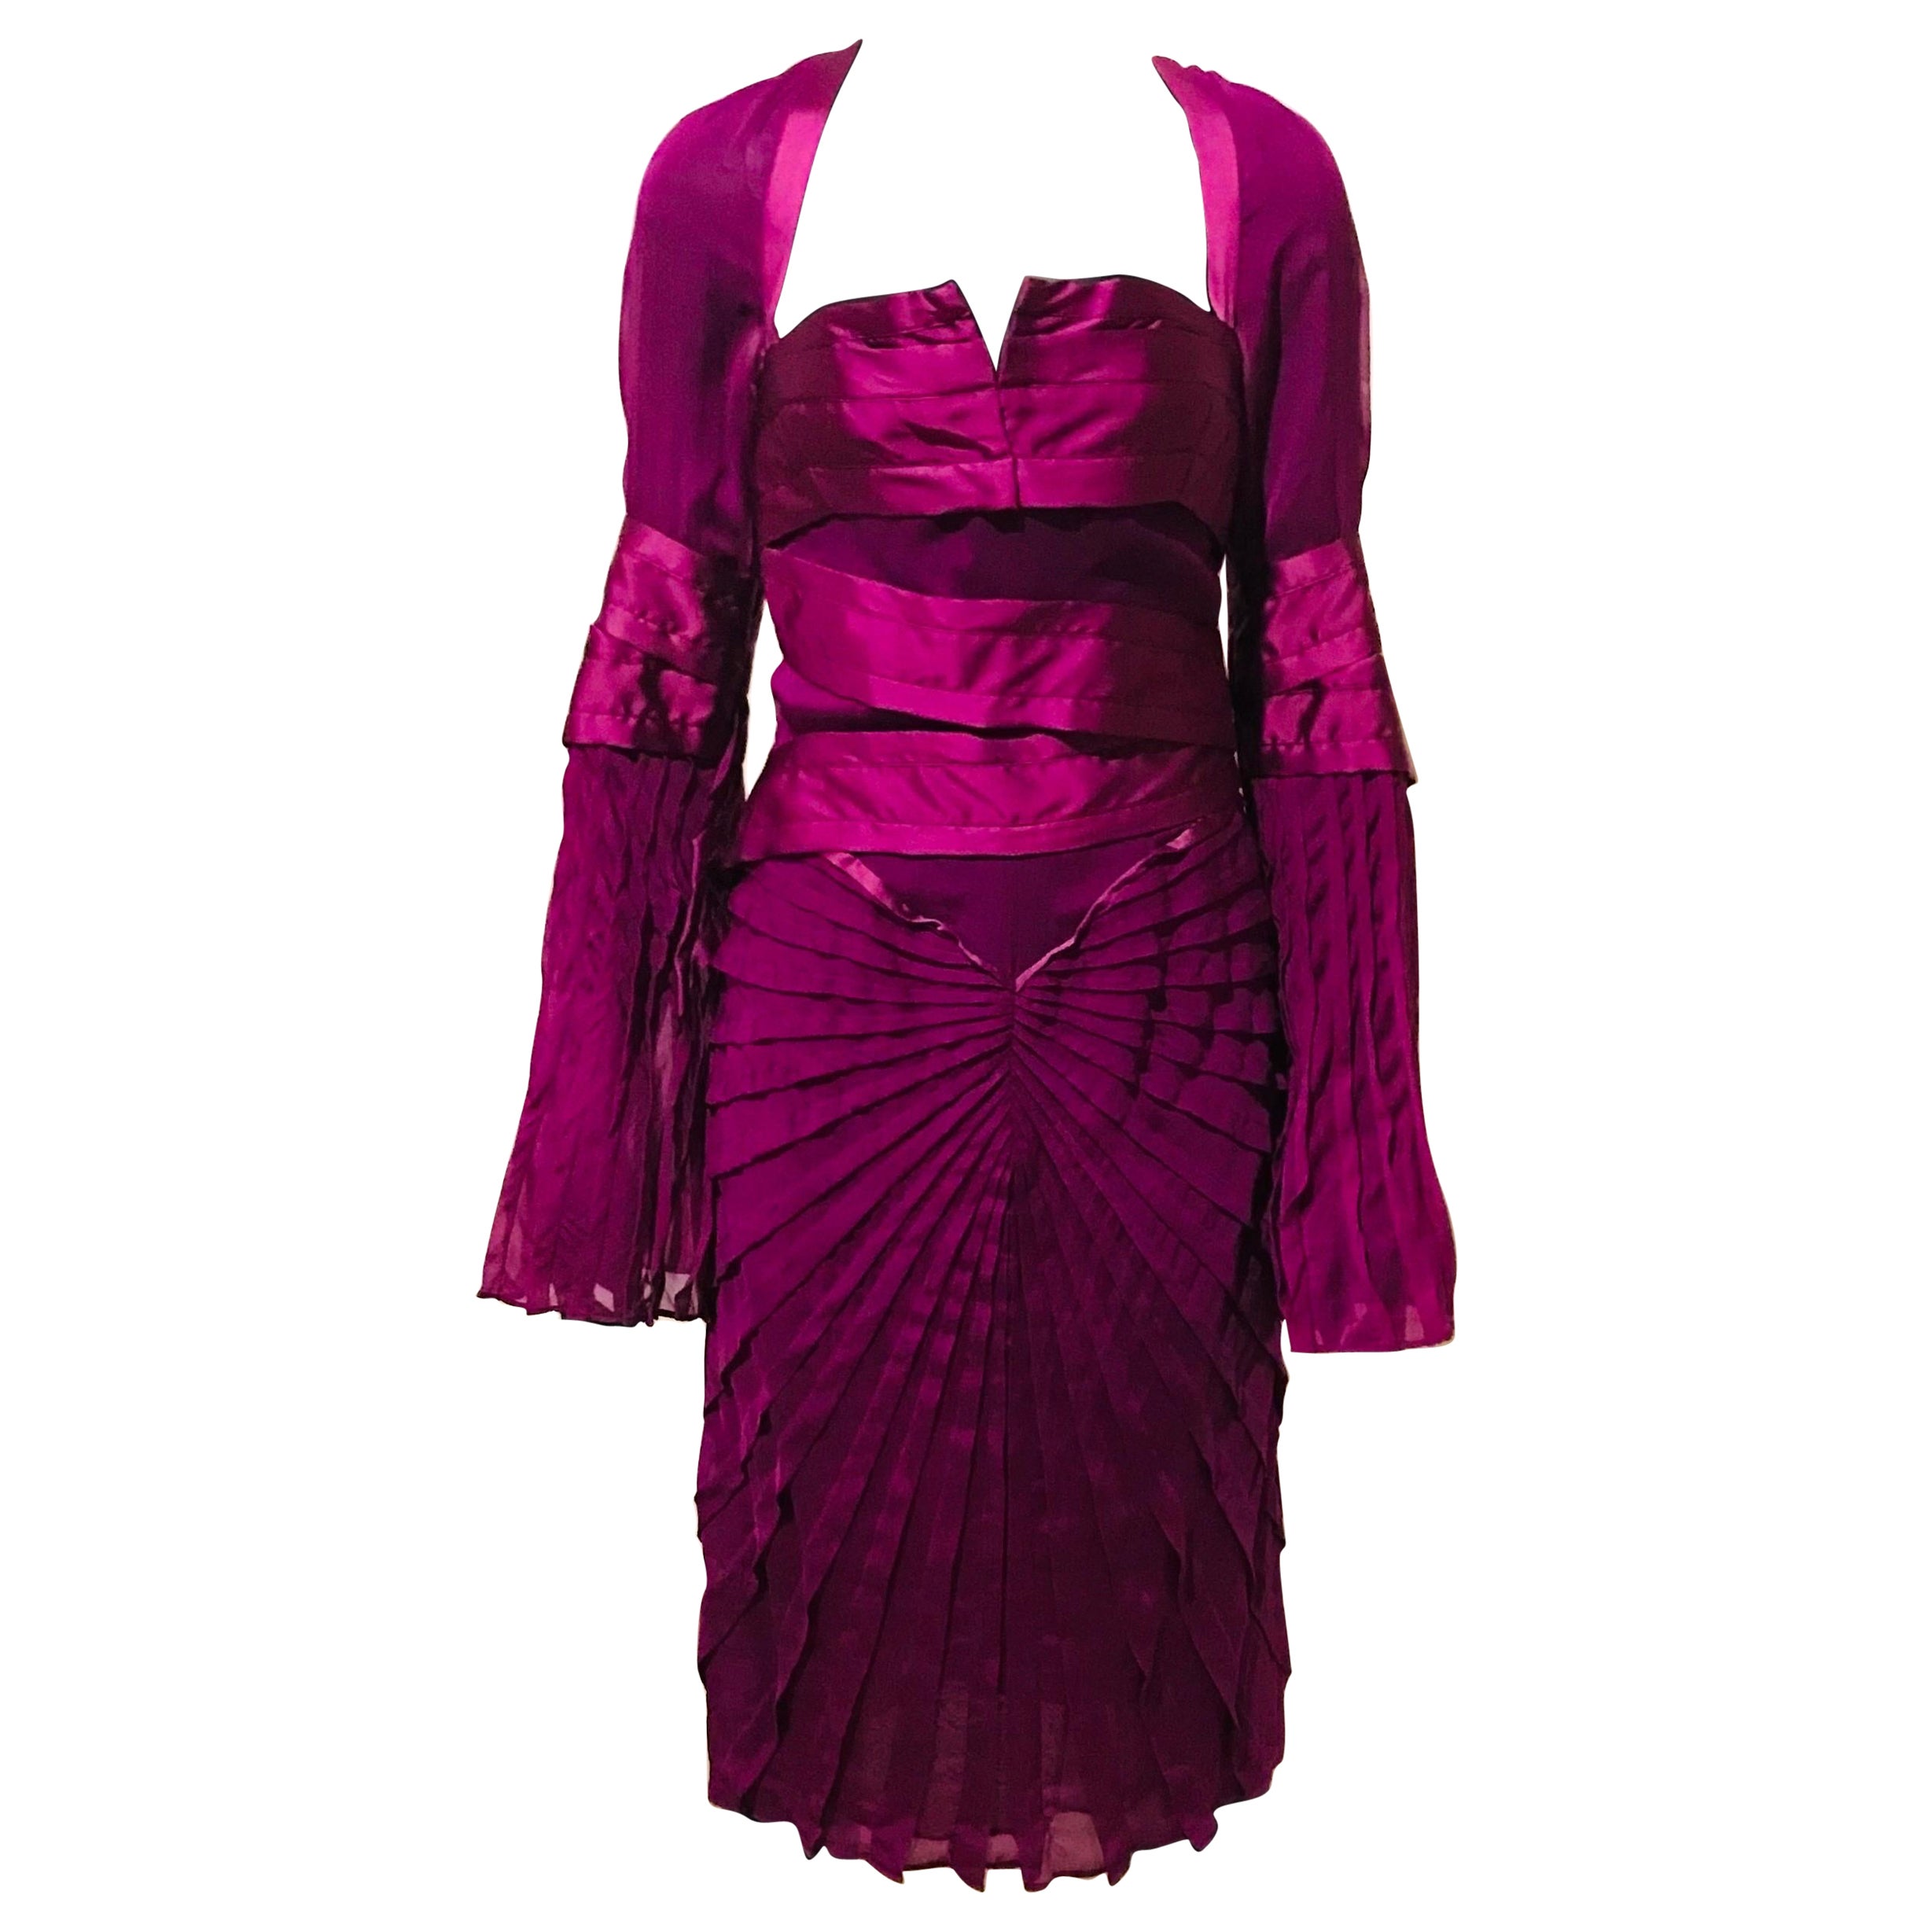 Final collection F/W look #27 Tom Ford for GUCCI magenta silk dress For Sale at 1stDibs image